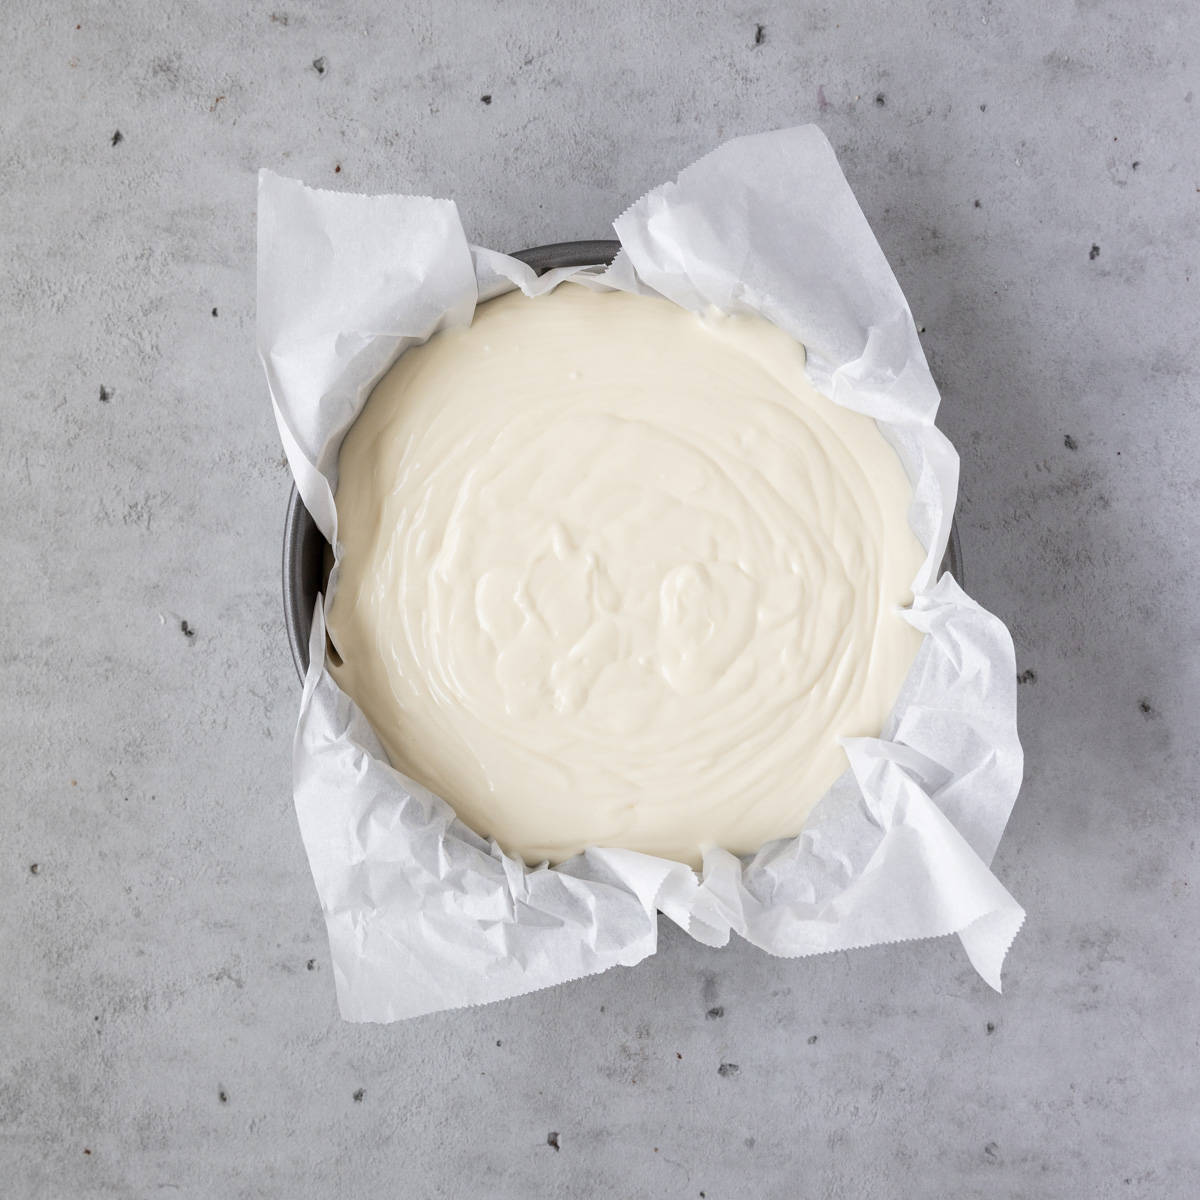 the cheesecake in a spring form pan lined with parchment paper before being baked.